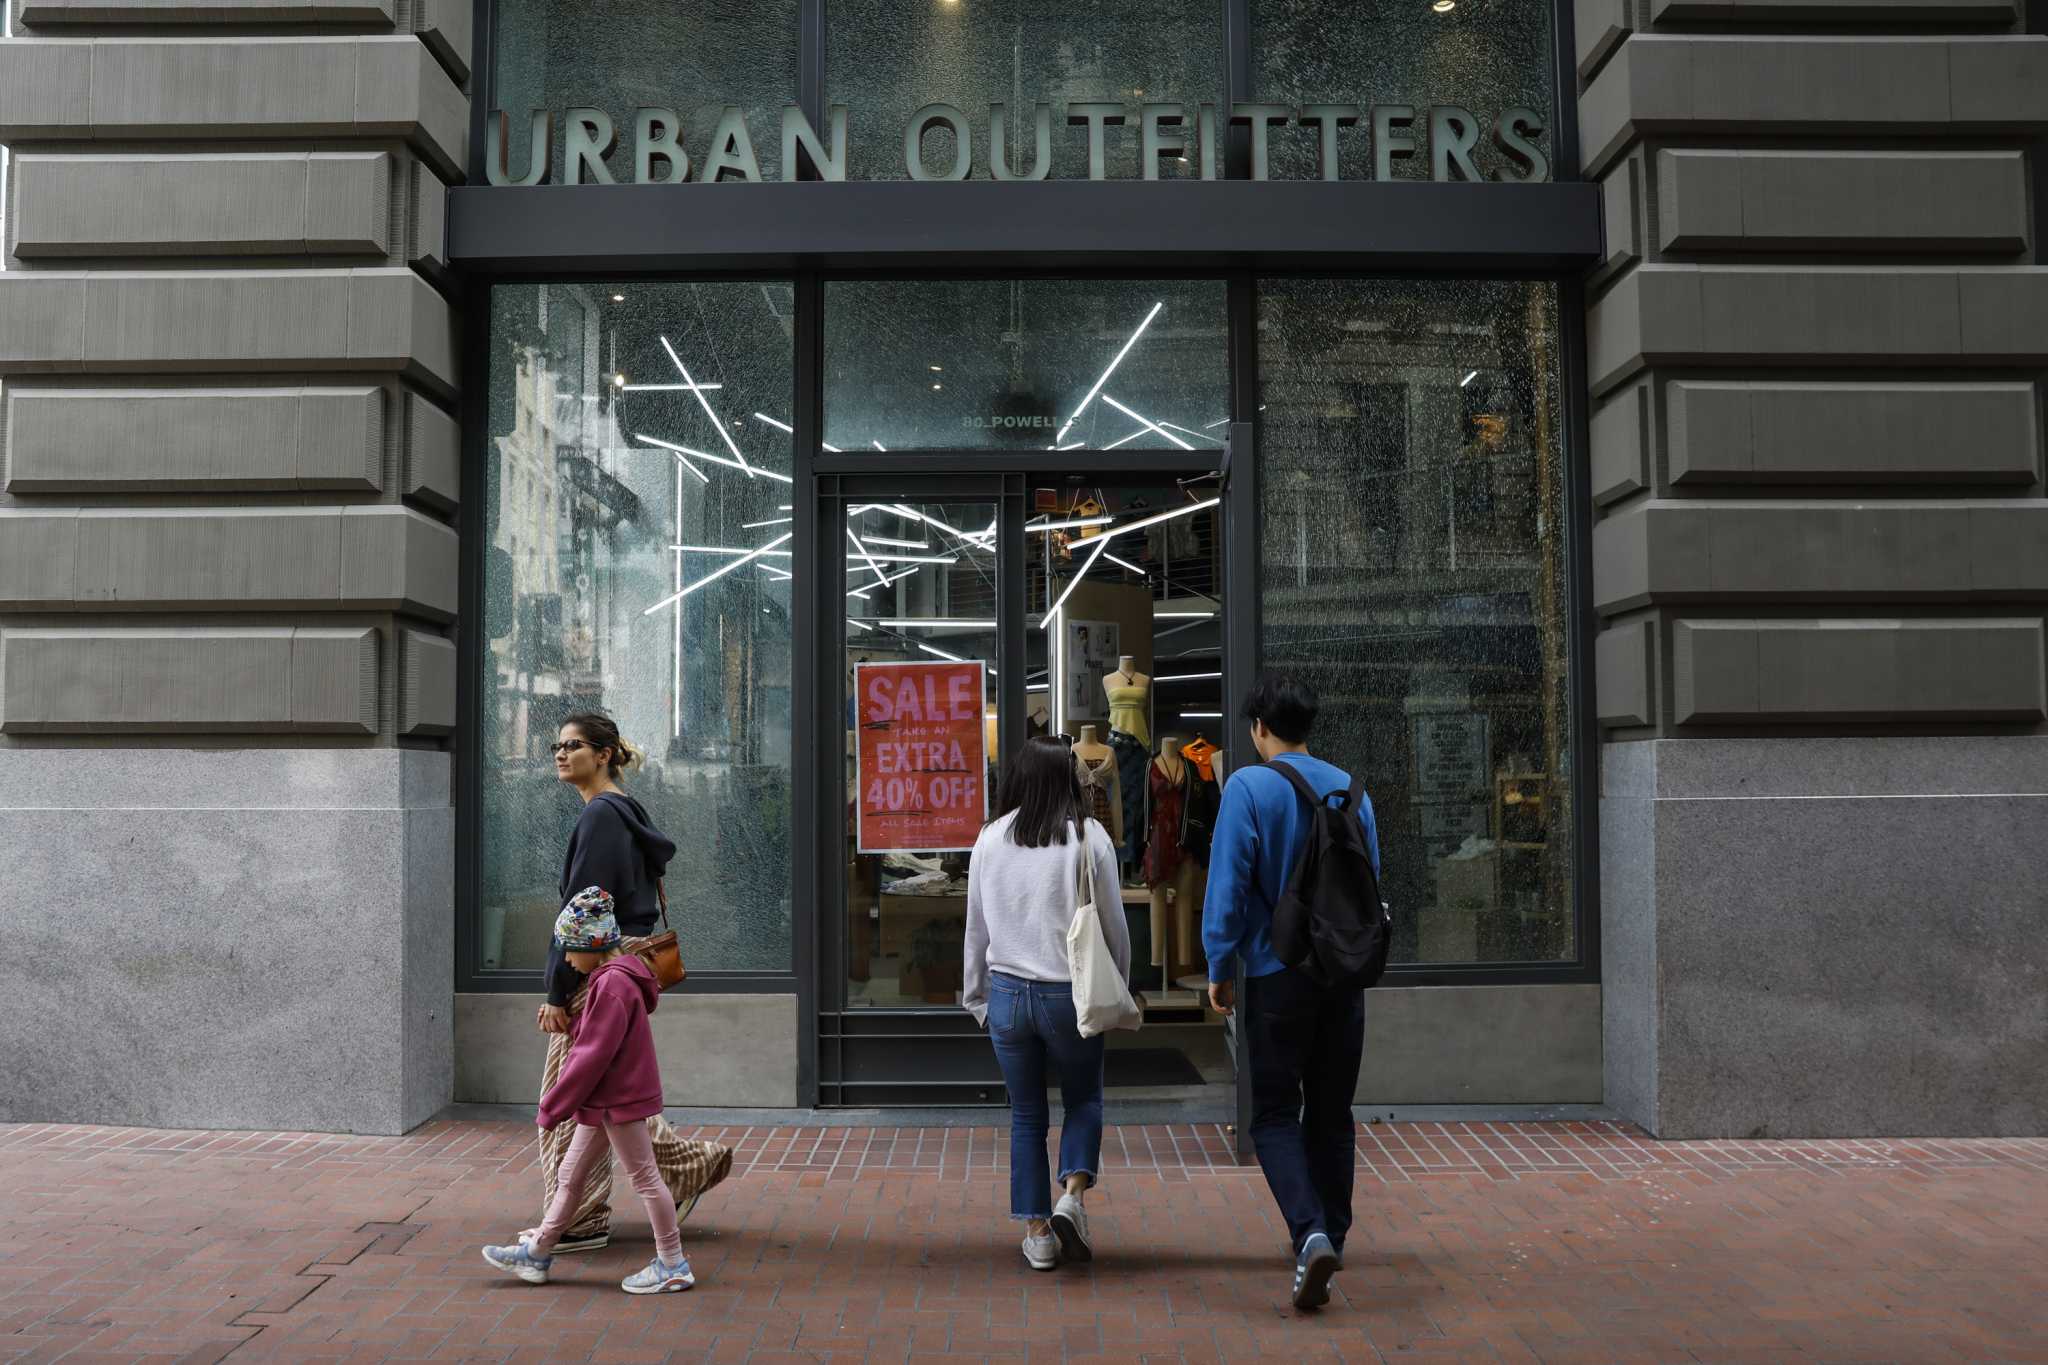 Downtown SF exodus: Inside one of the last big stores in retail hub